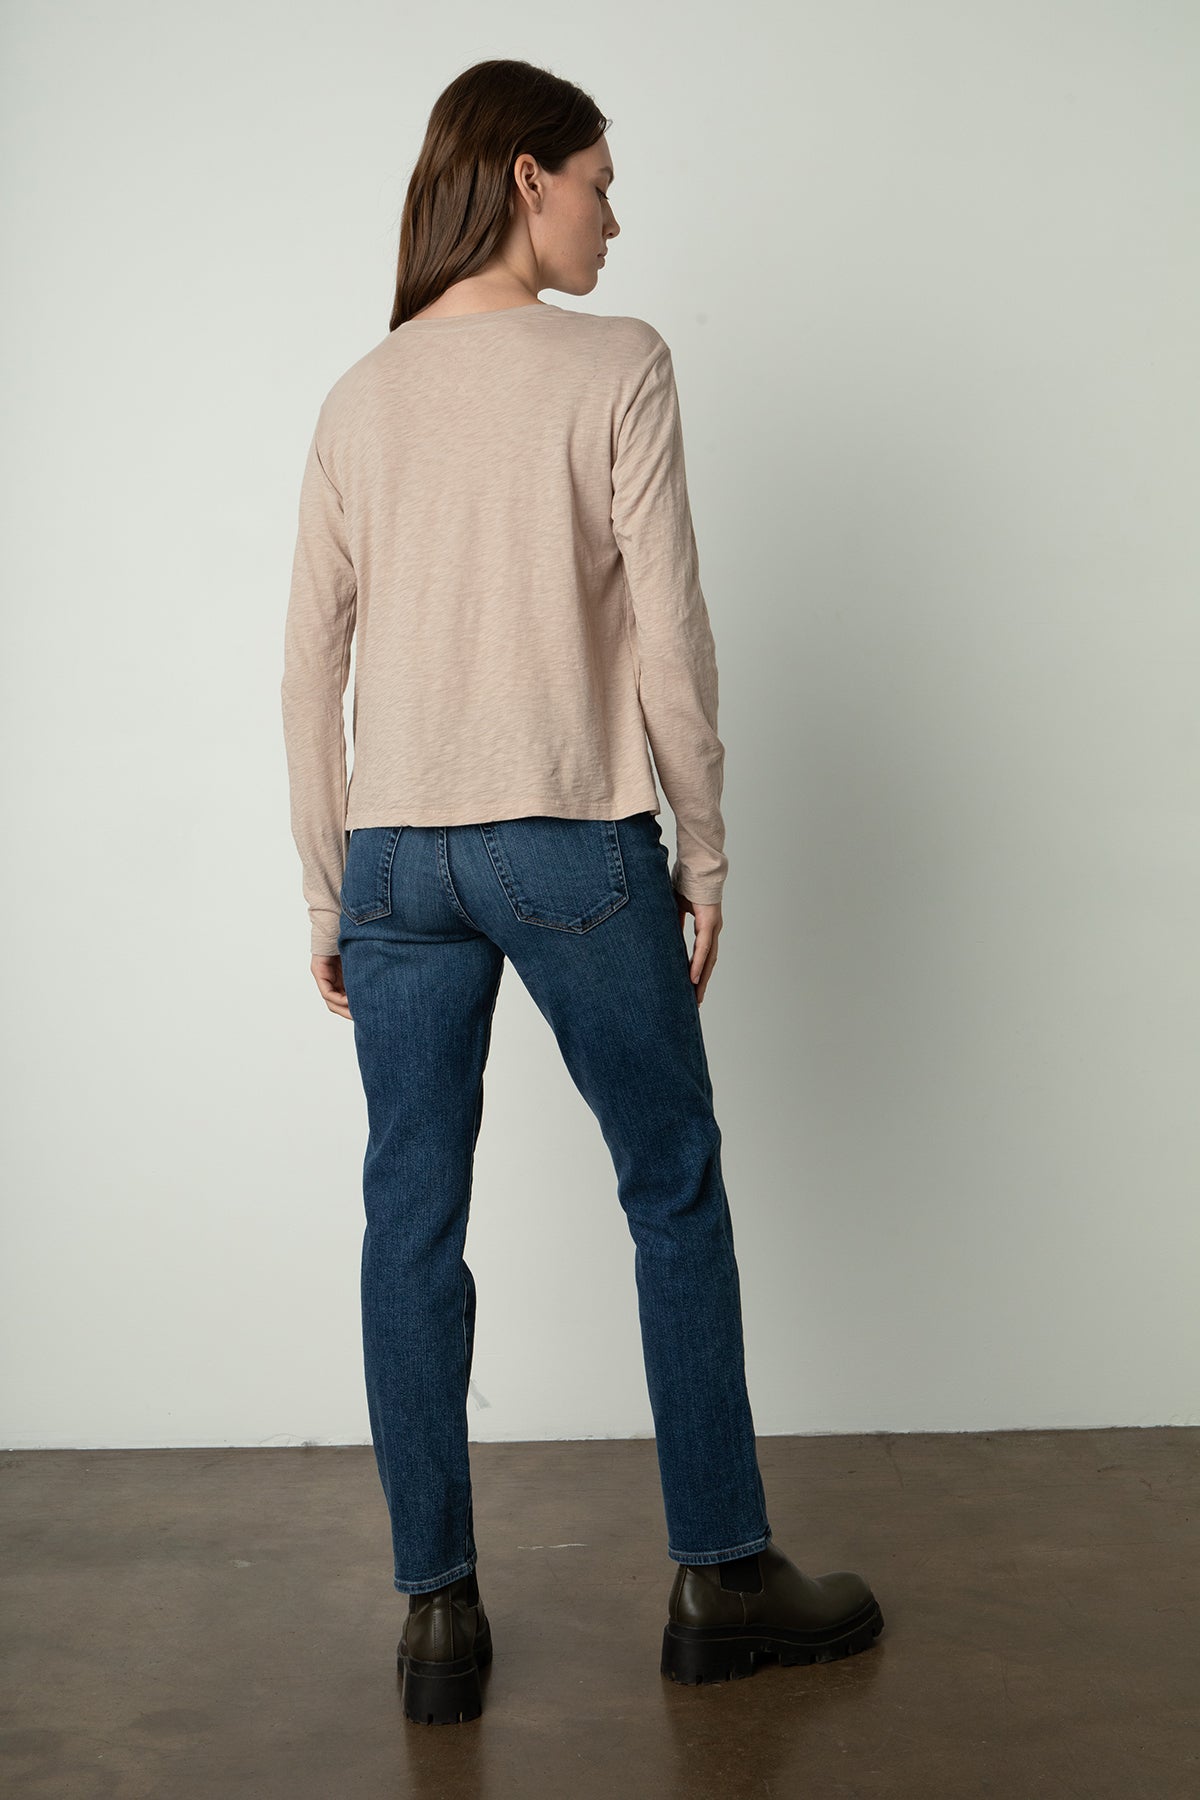   the back view of a woman wearing Velvet by Graham & Spencer jeans and a HESTER CREW NECK TEE. 